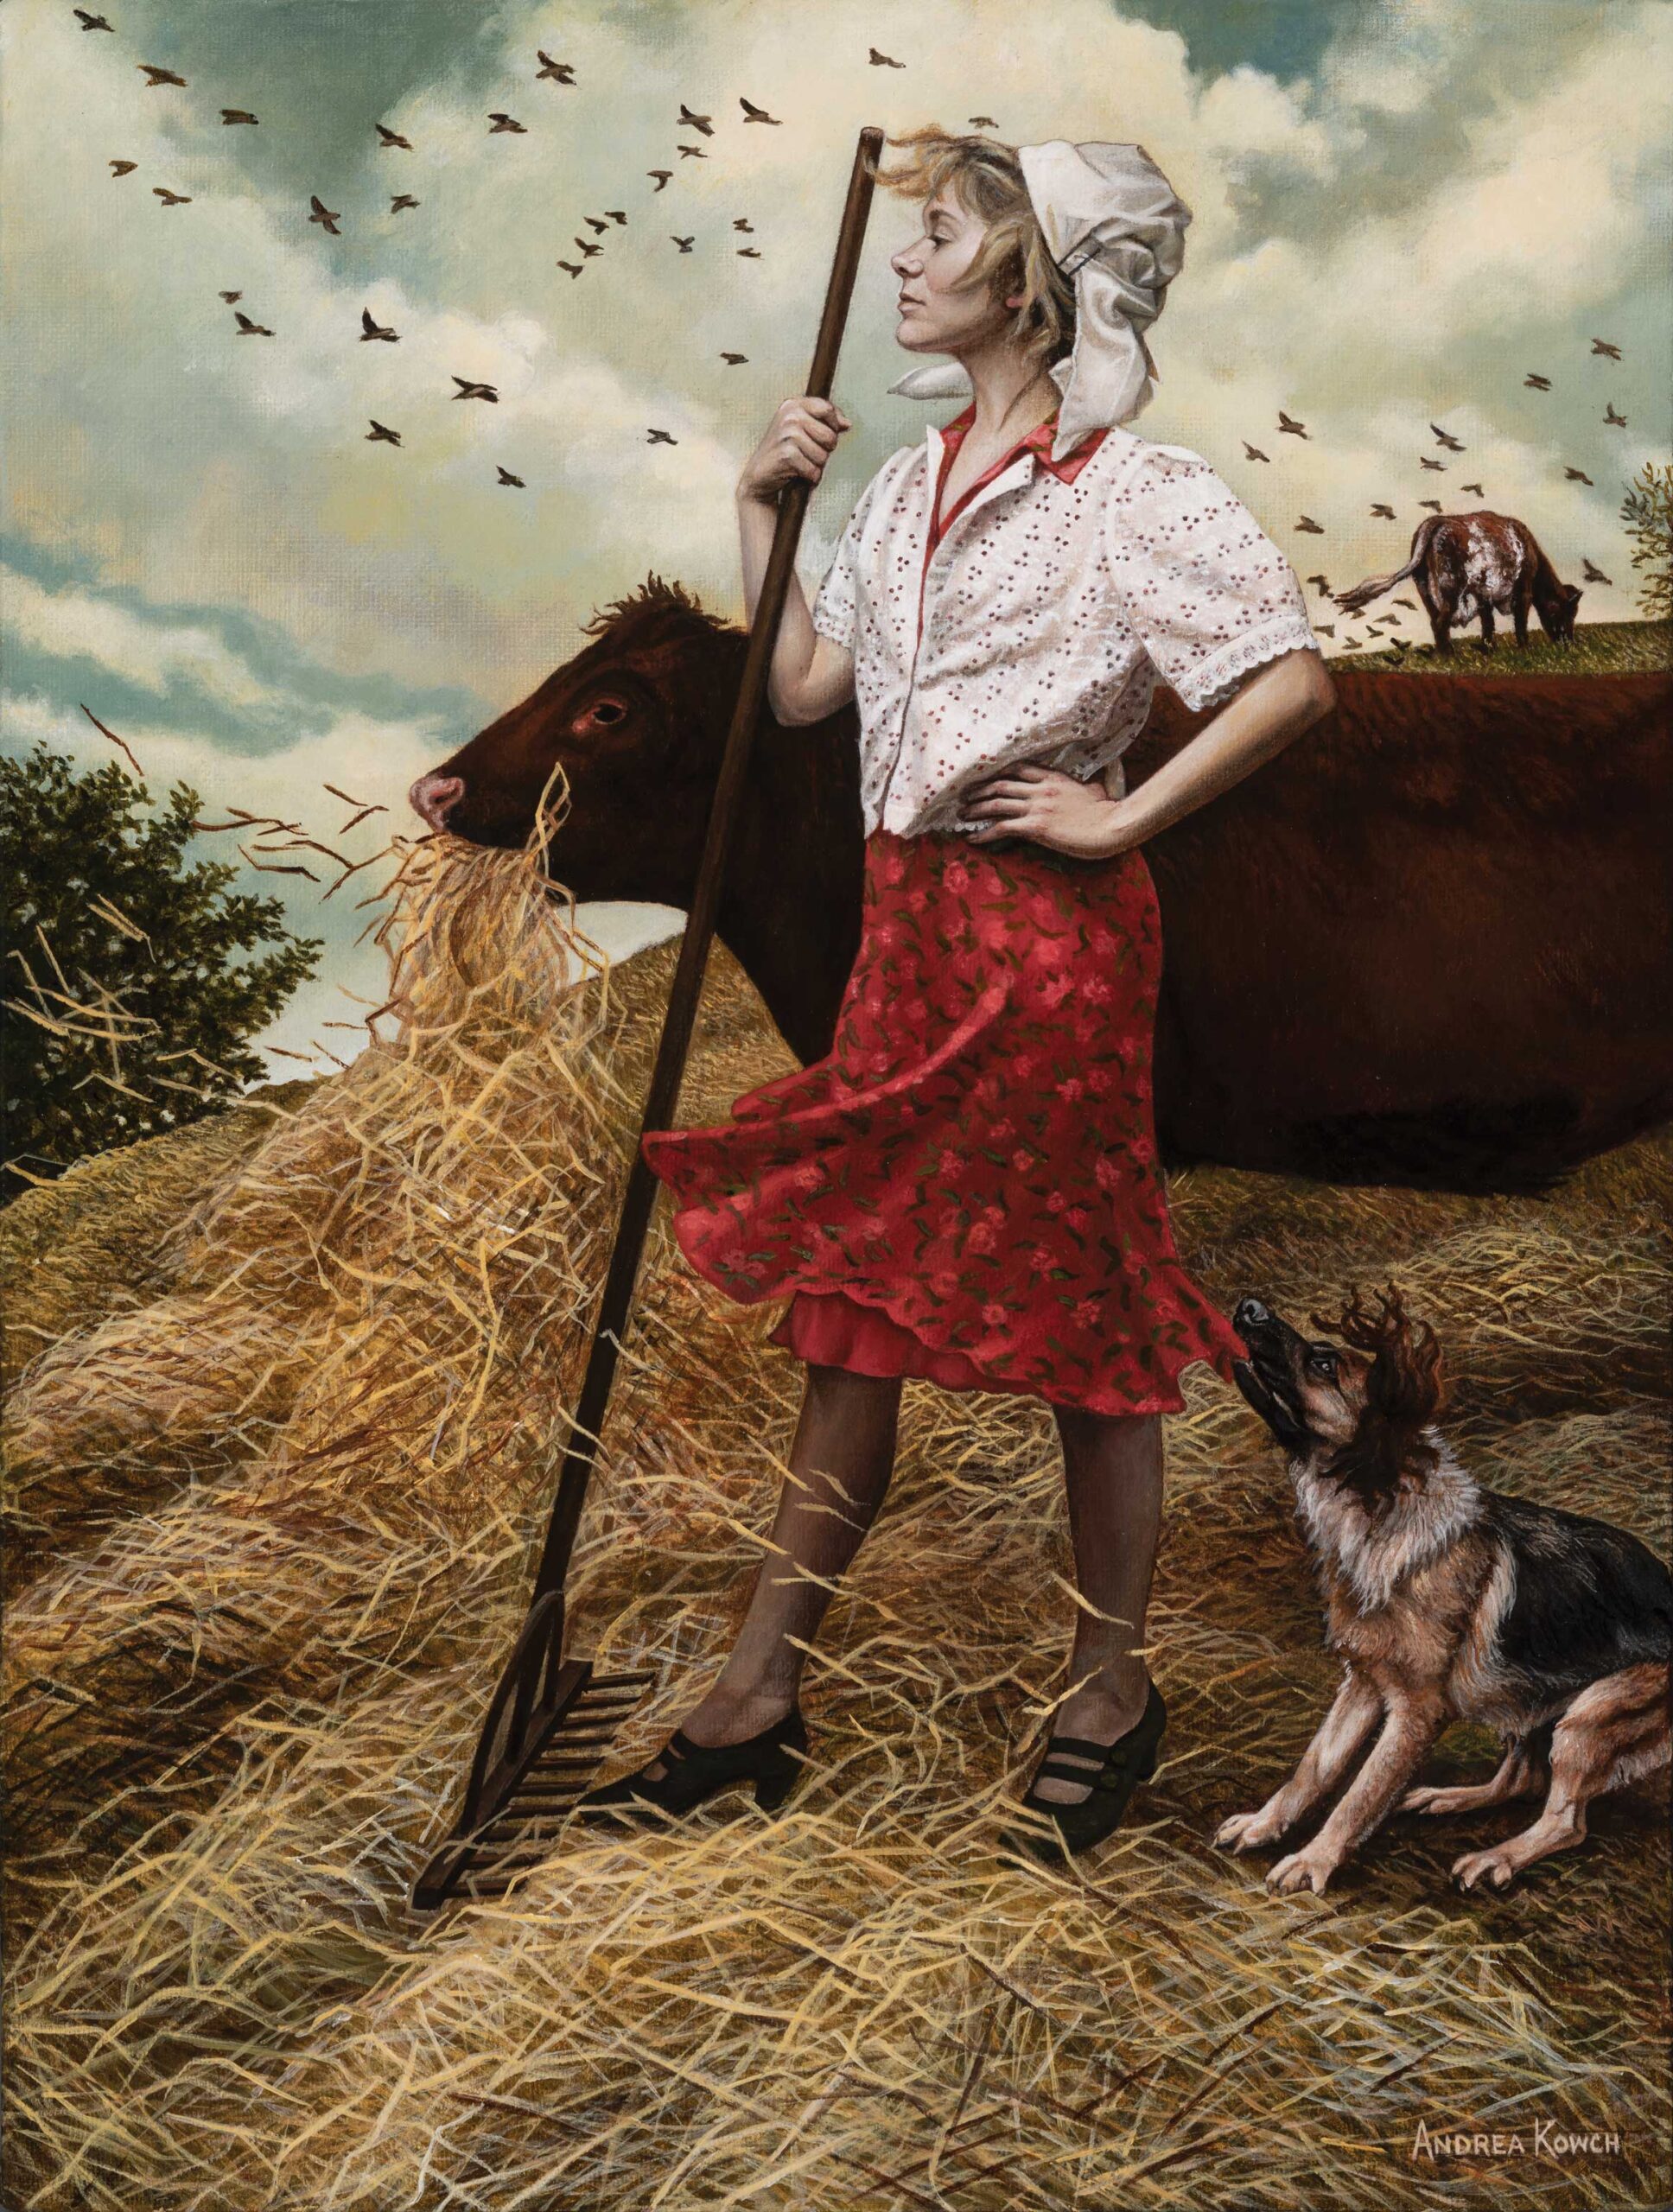 narrative art - Andrea Kowch, (b. 1986), "Steadfast," 2019, acrylic on canvas, 16 x 12 in., private collection